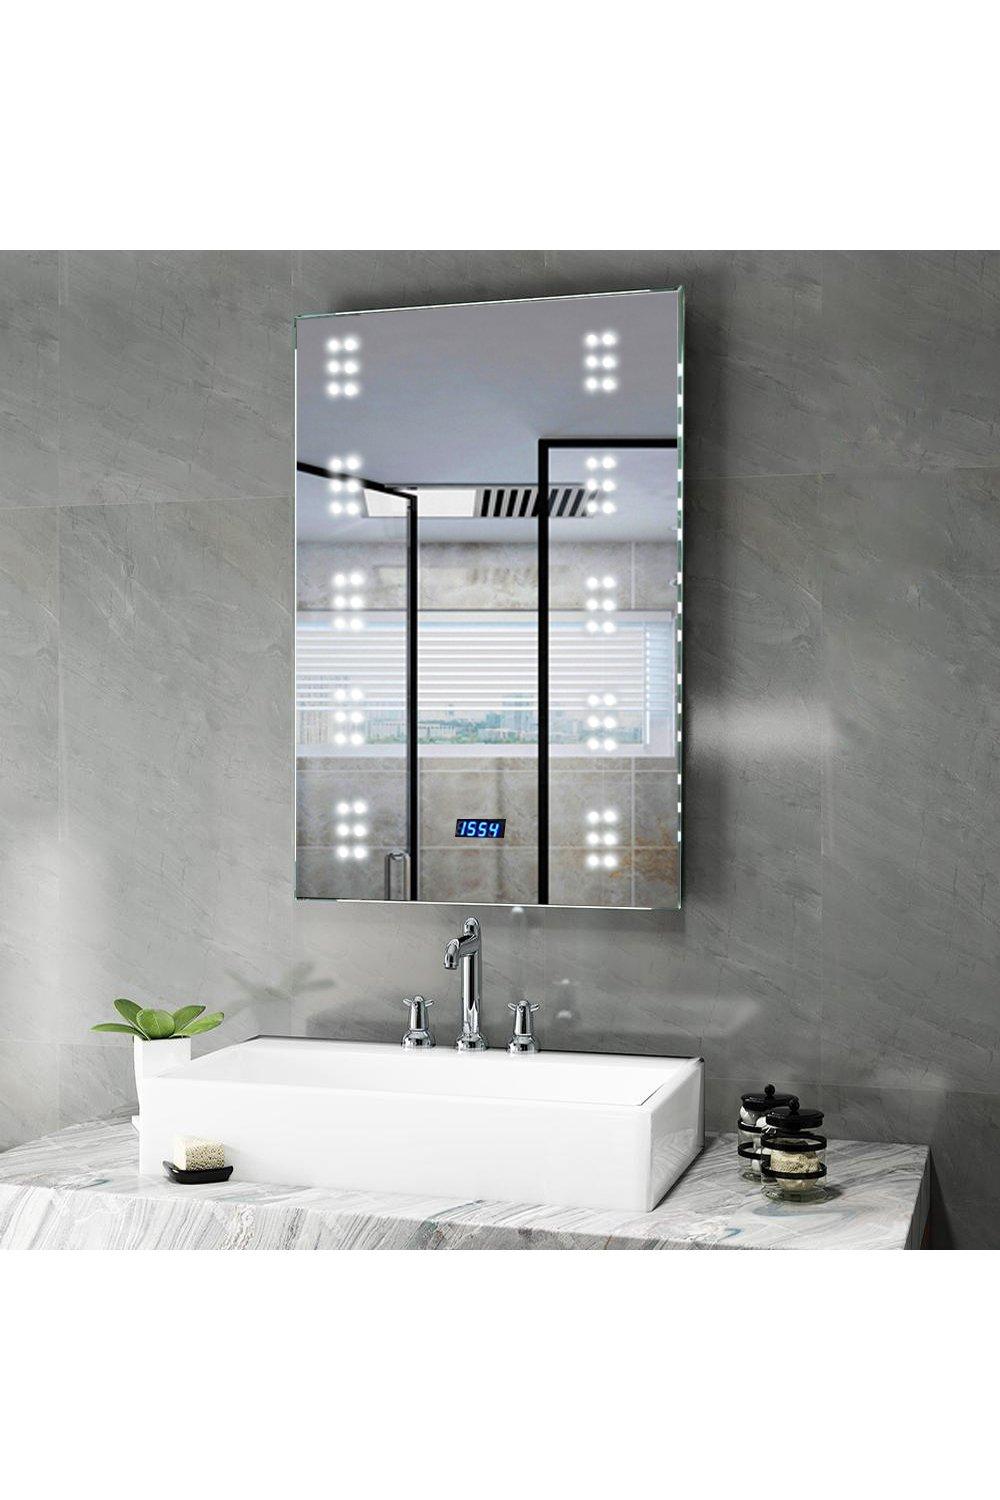 Bathroom Anti-Fog Wall Mounting LED Vanity Mirror with Sensor Switch and Clock